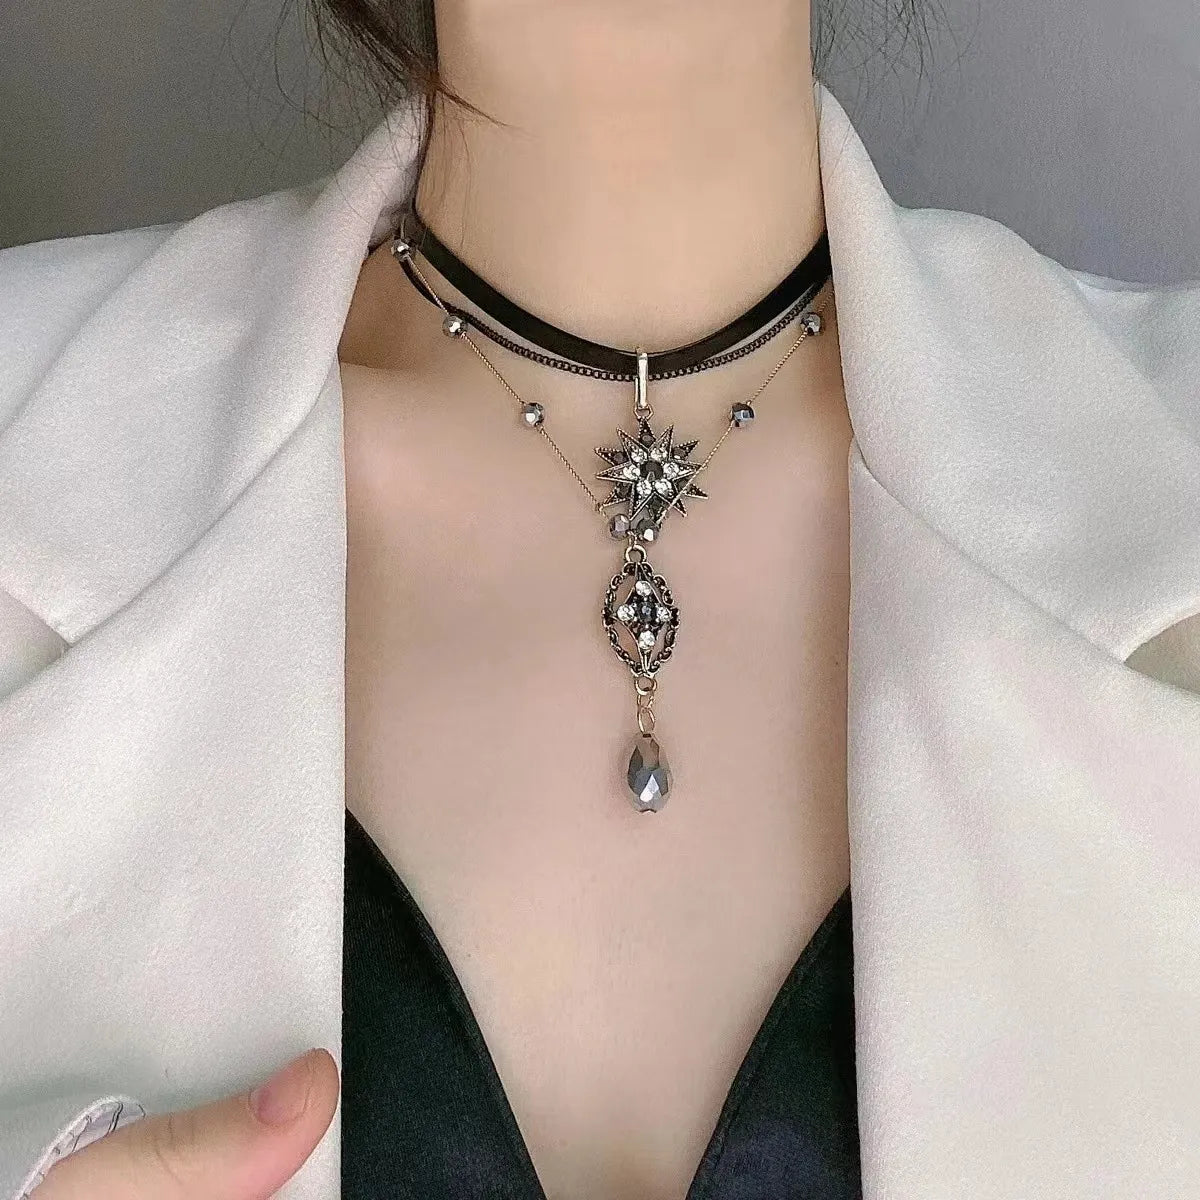 Neo-Gothic Crystal Multi-Layer Leather Necklace Exquisite Star Water Drop Choker Necklace for Women Girls Party Wedding Jewelry